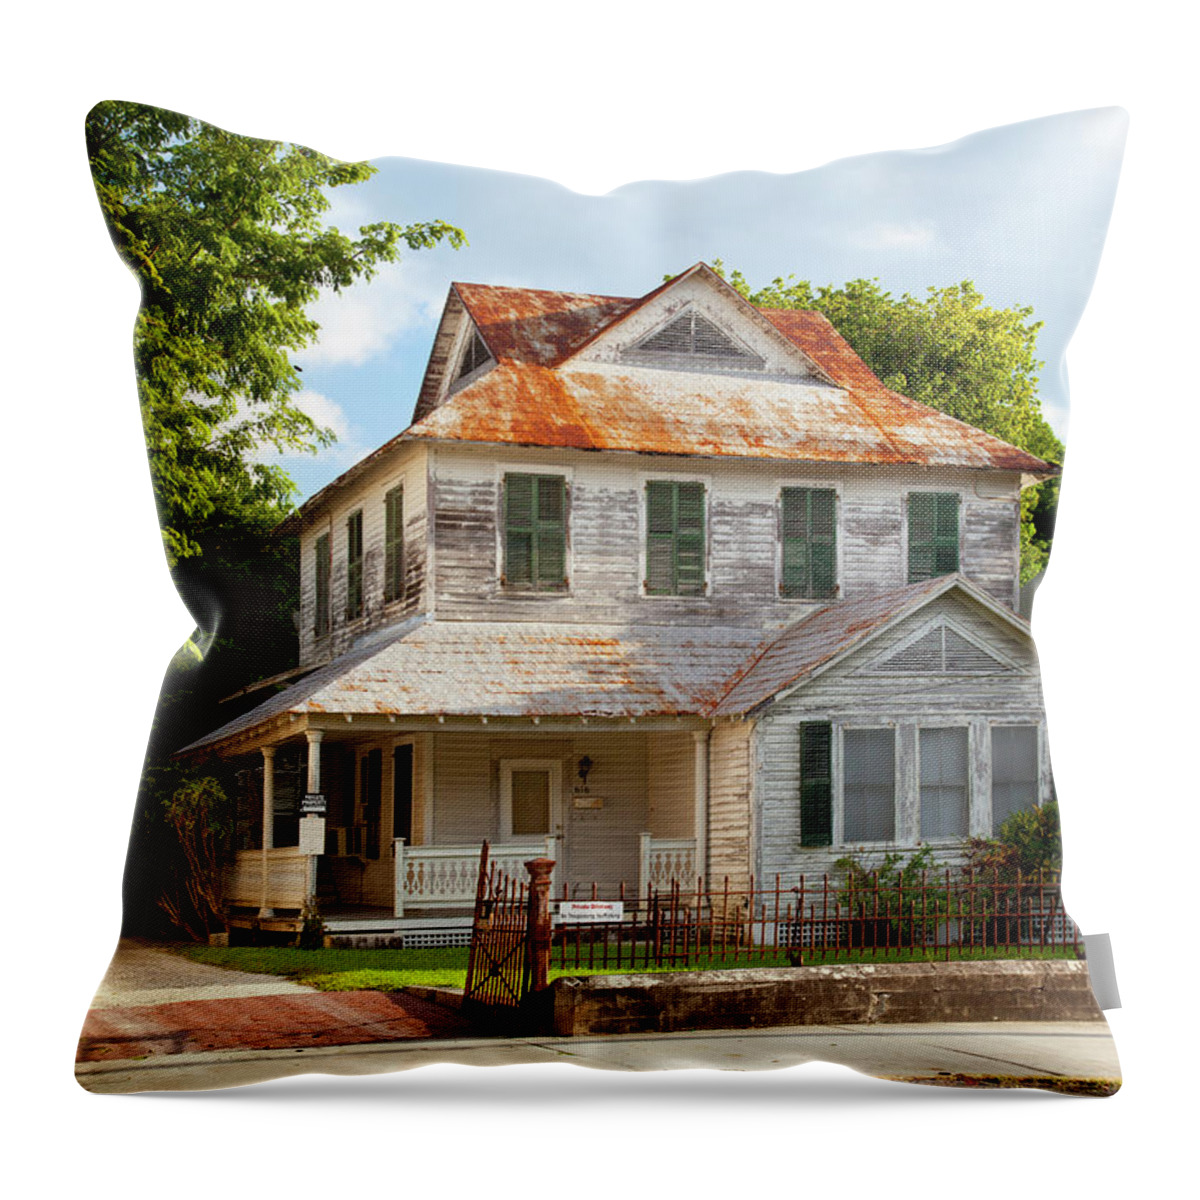 Home Throw Pillow featuring the photograph In Transition Key West Florida by Michelle Constantine